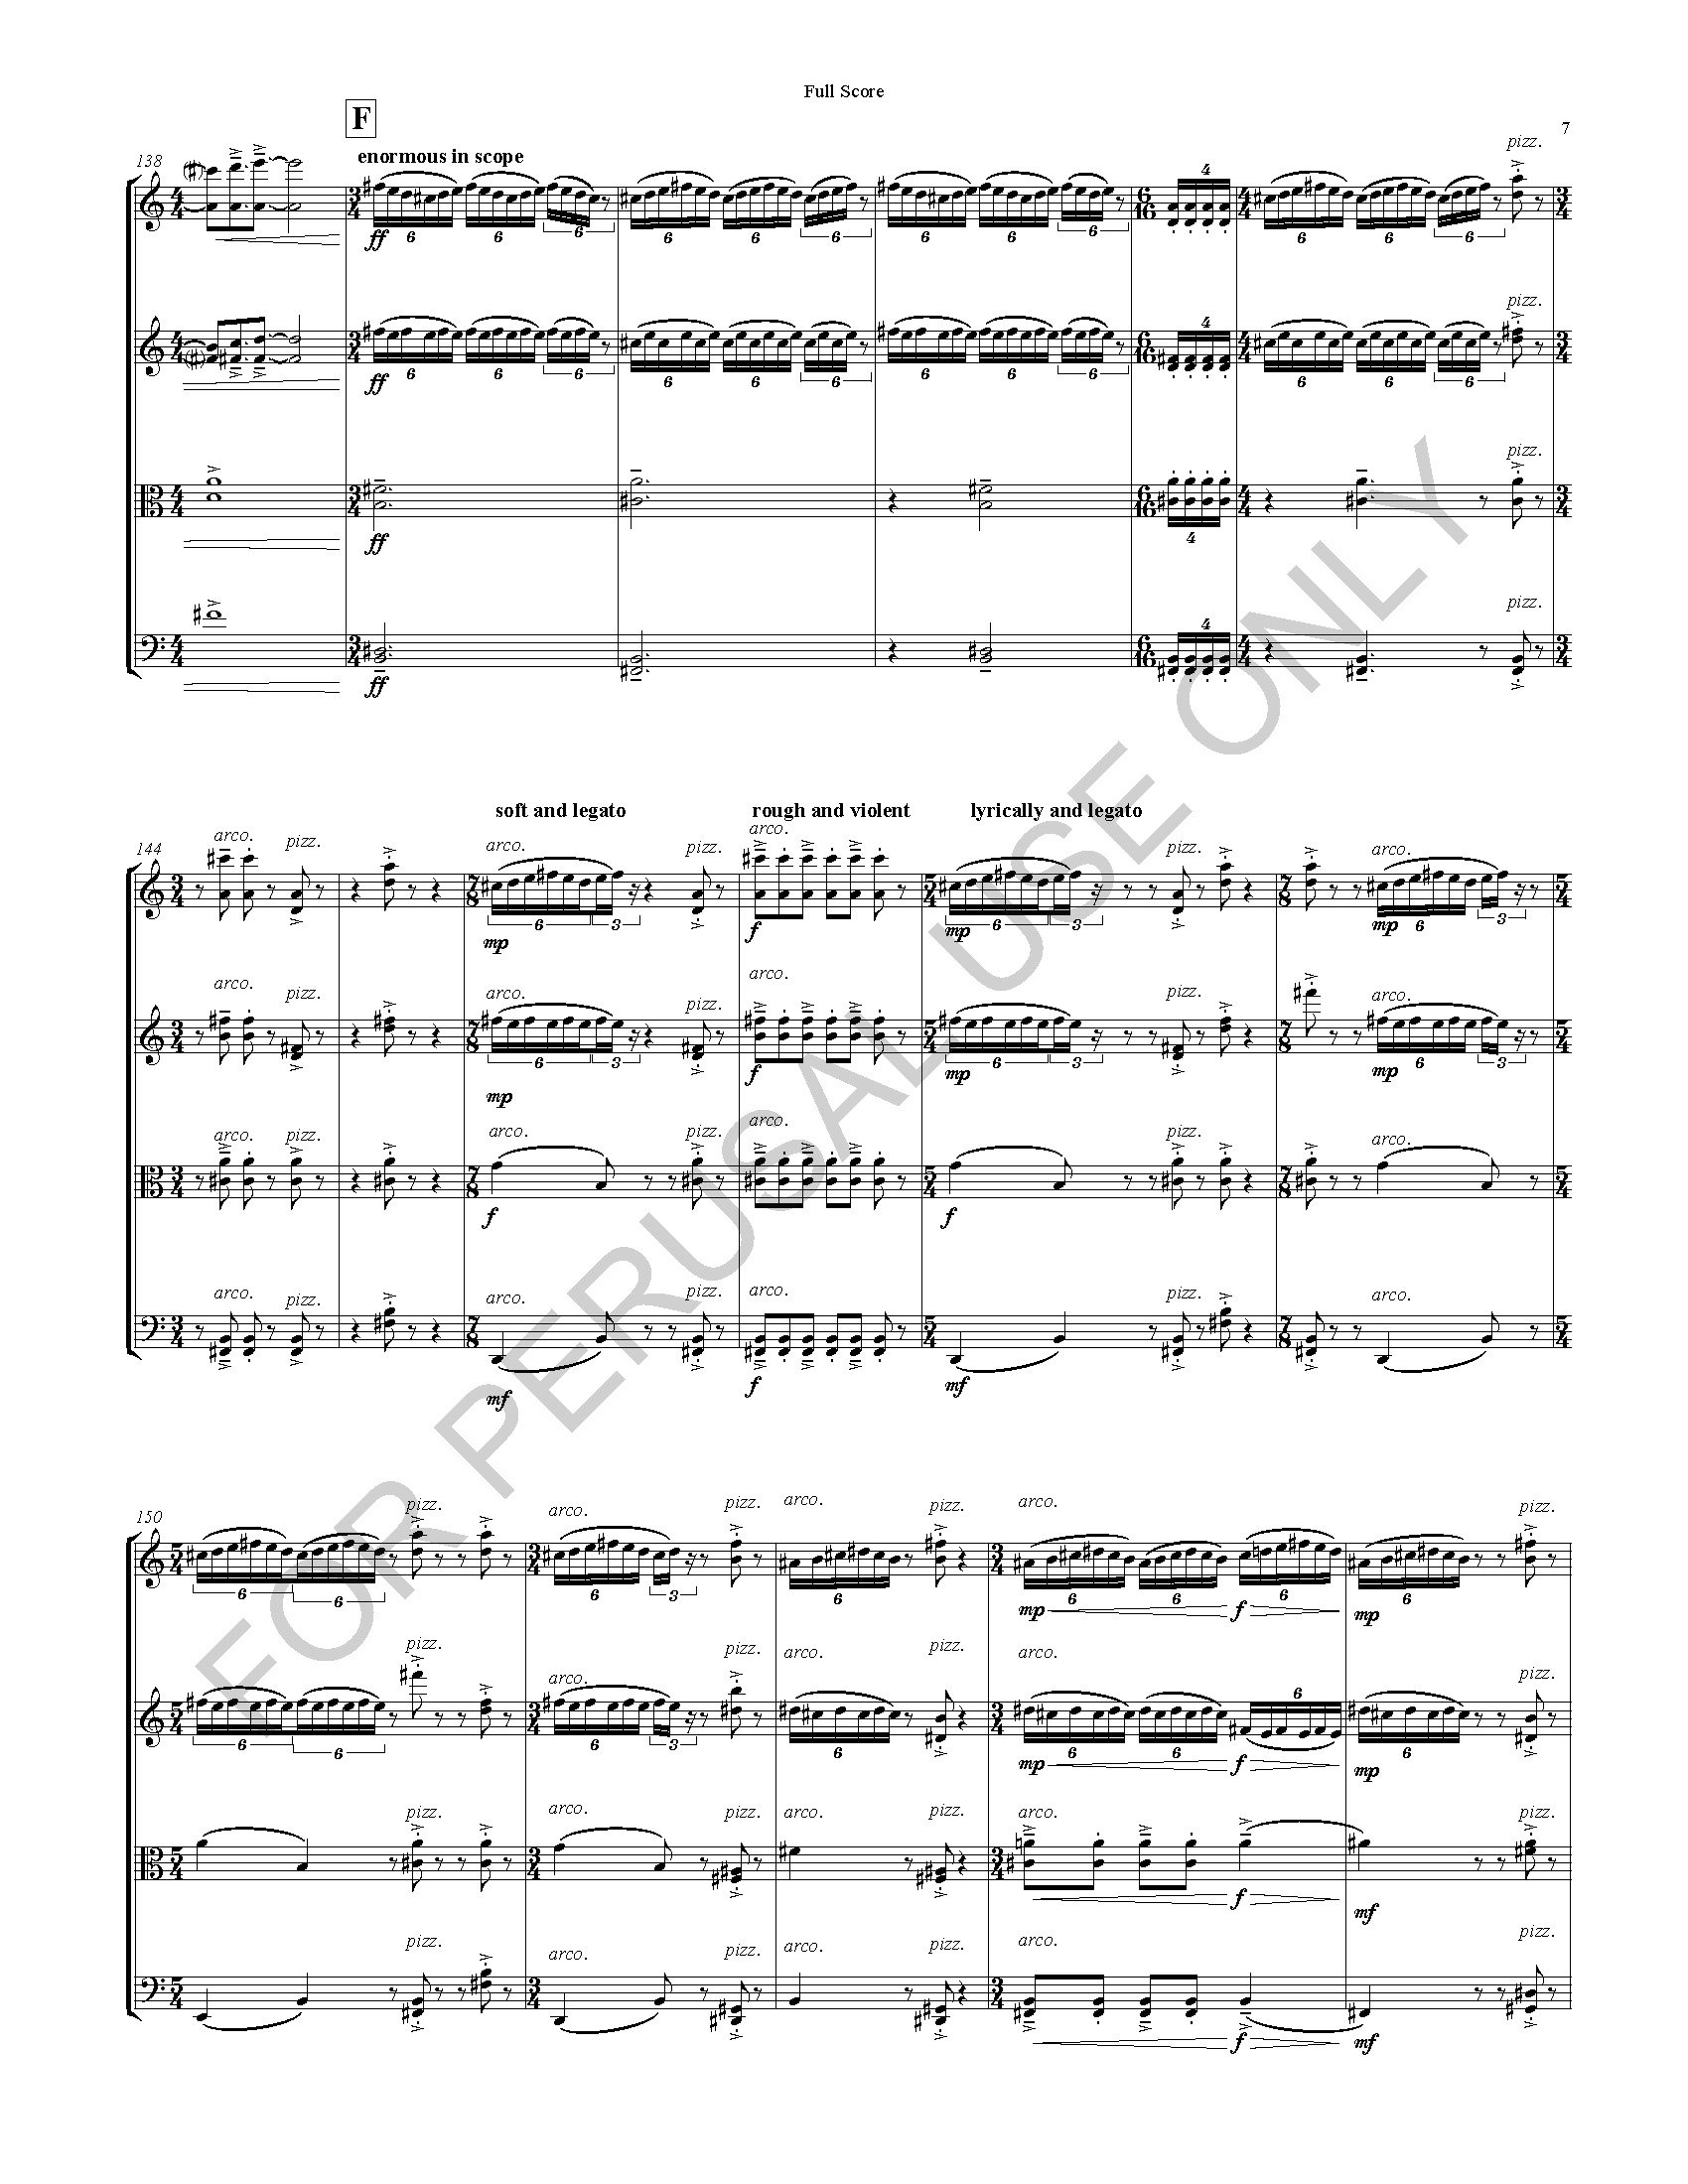 REFERENCE Smear Music (Full Score)_Page_07.jpg